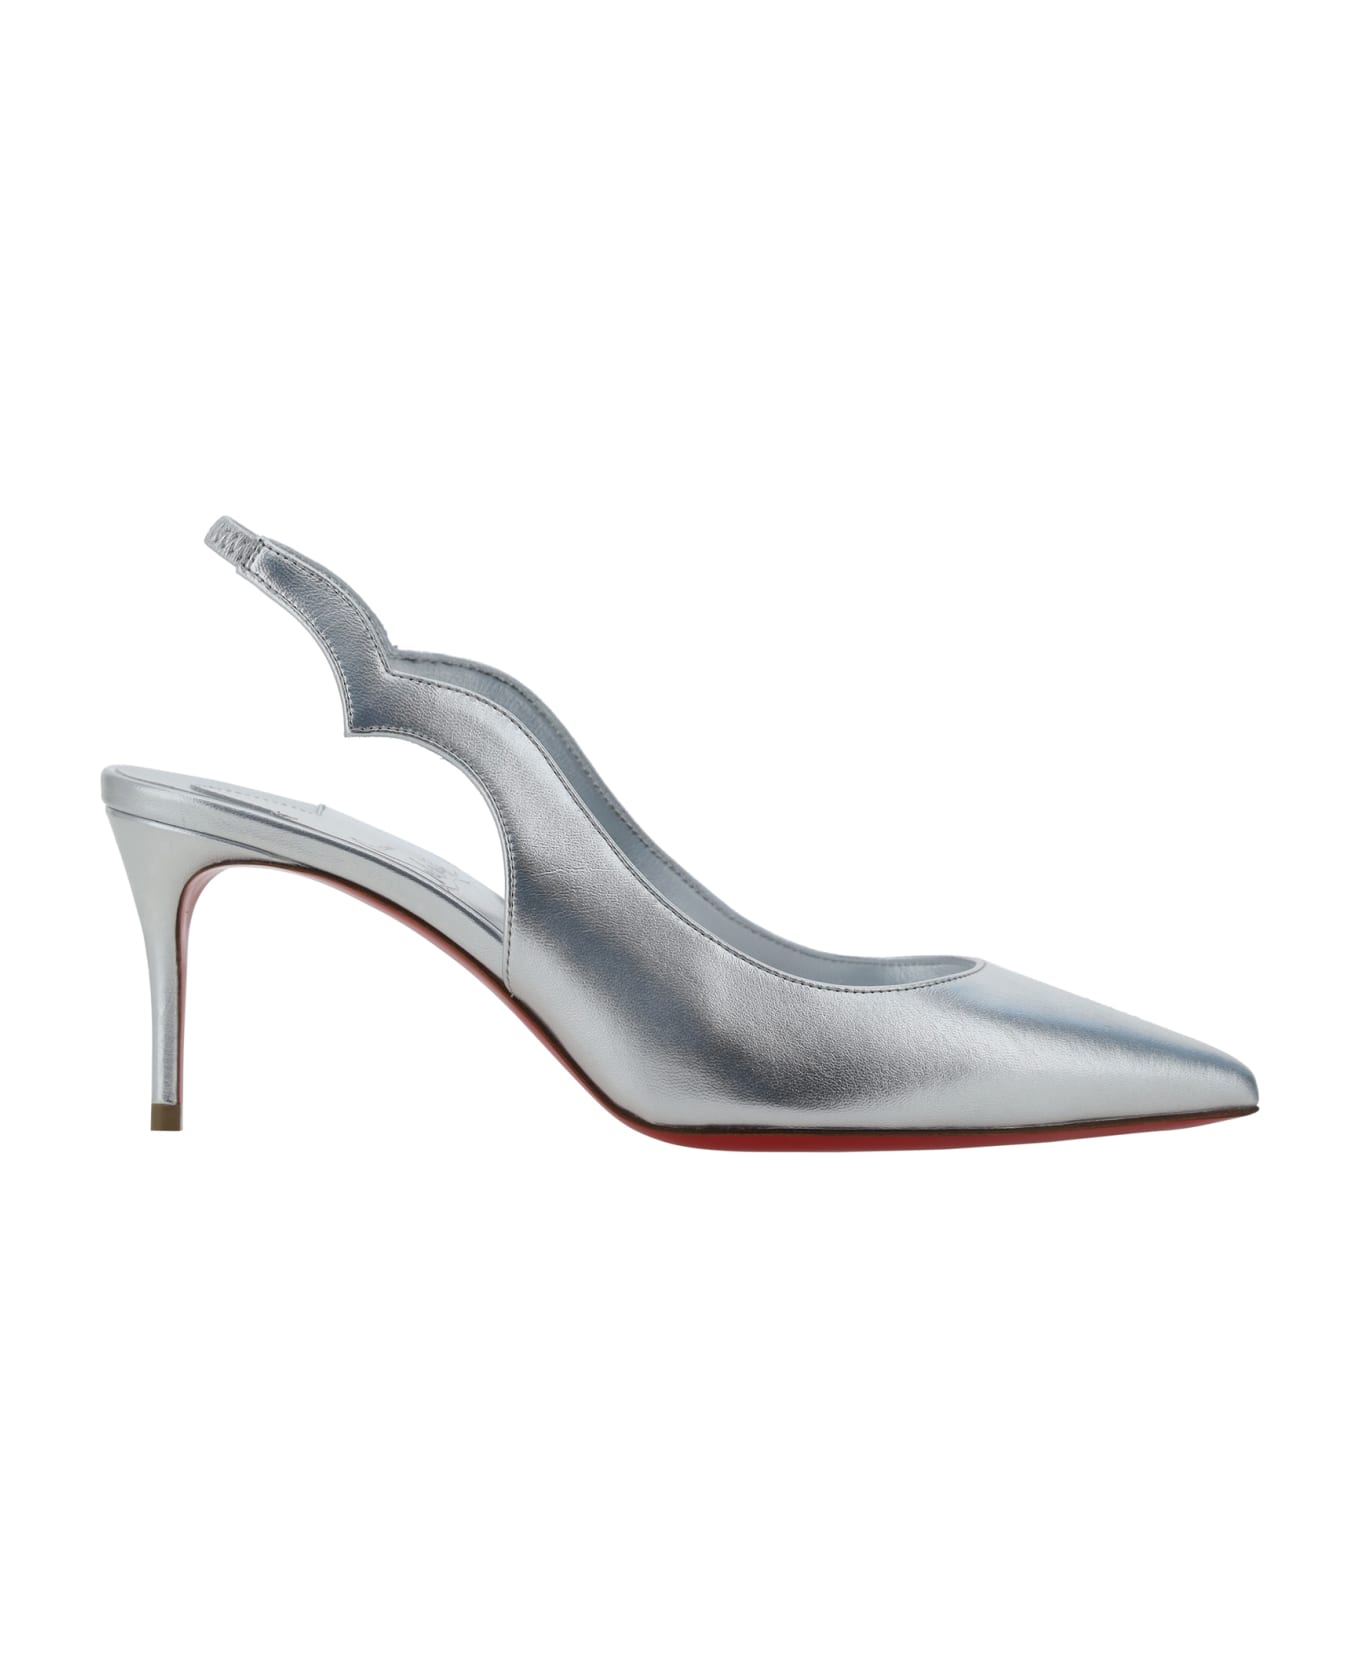 Christian Louboutin Hot Chick Pumps - Silver/lin Silver